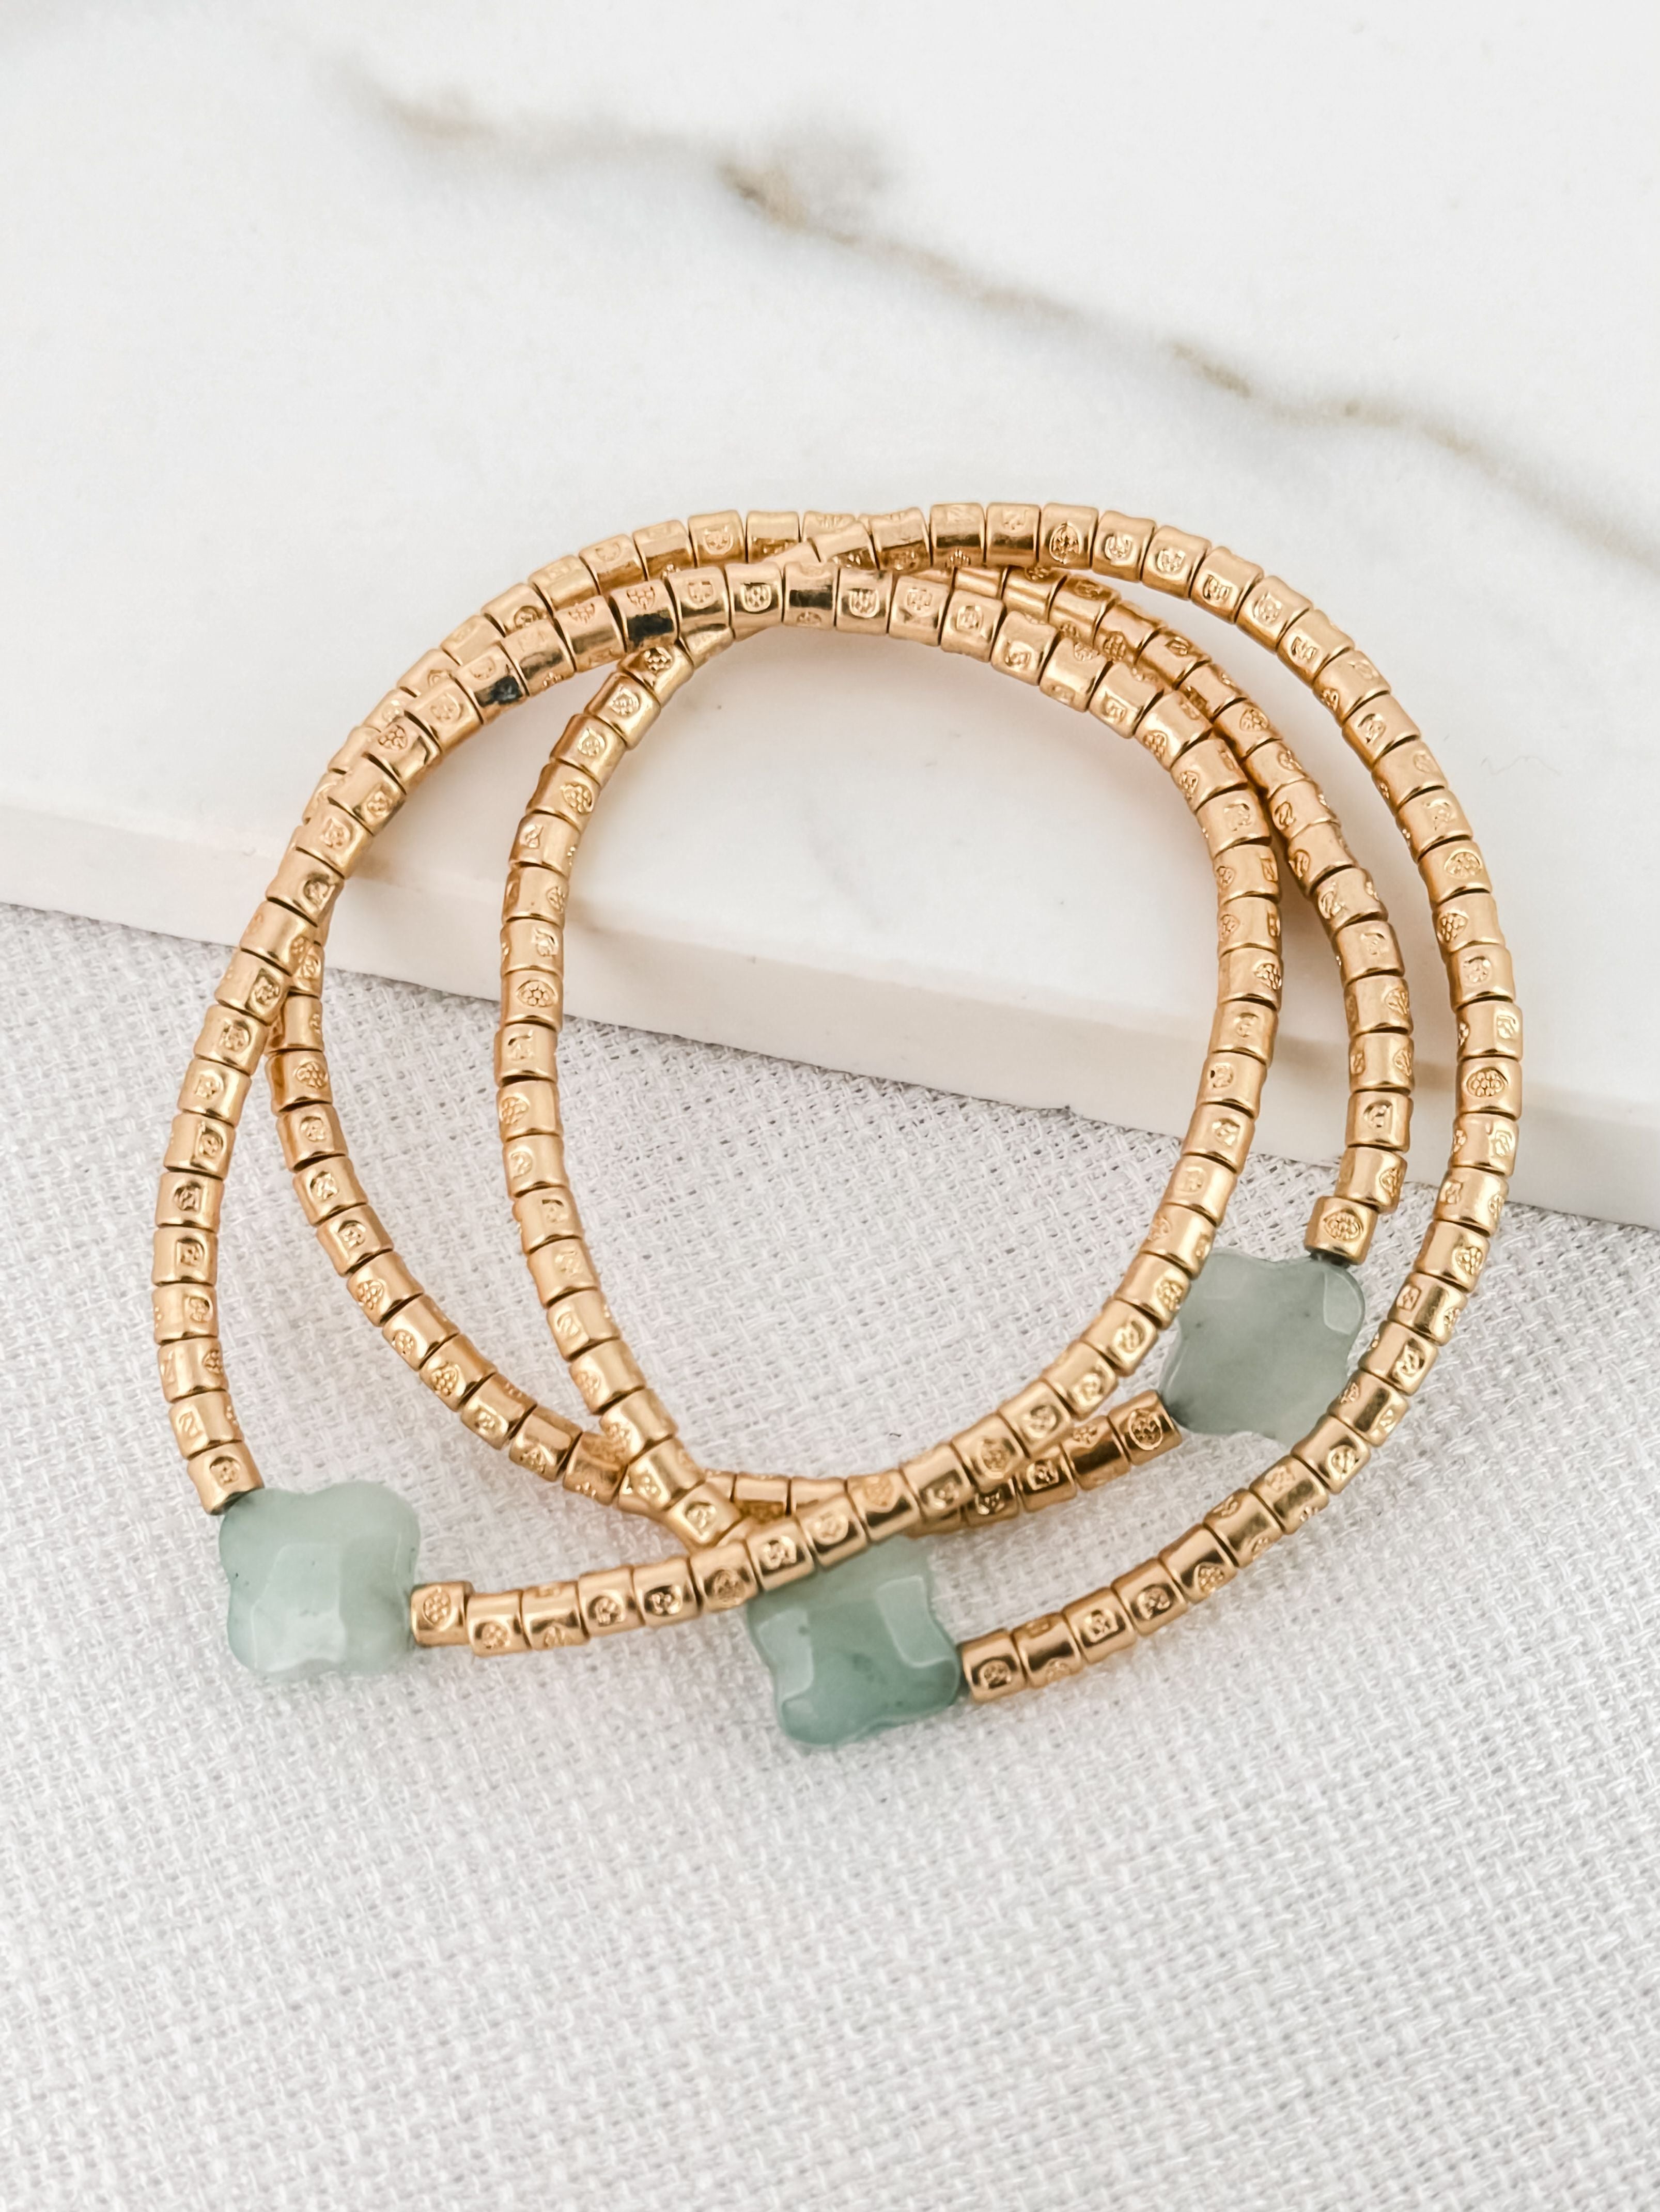 Triple Bracelet in Gold with Turquoise Mini Clovers